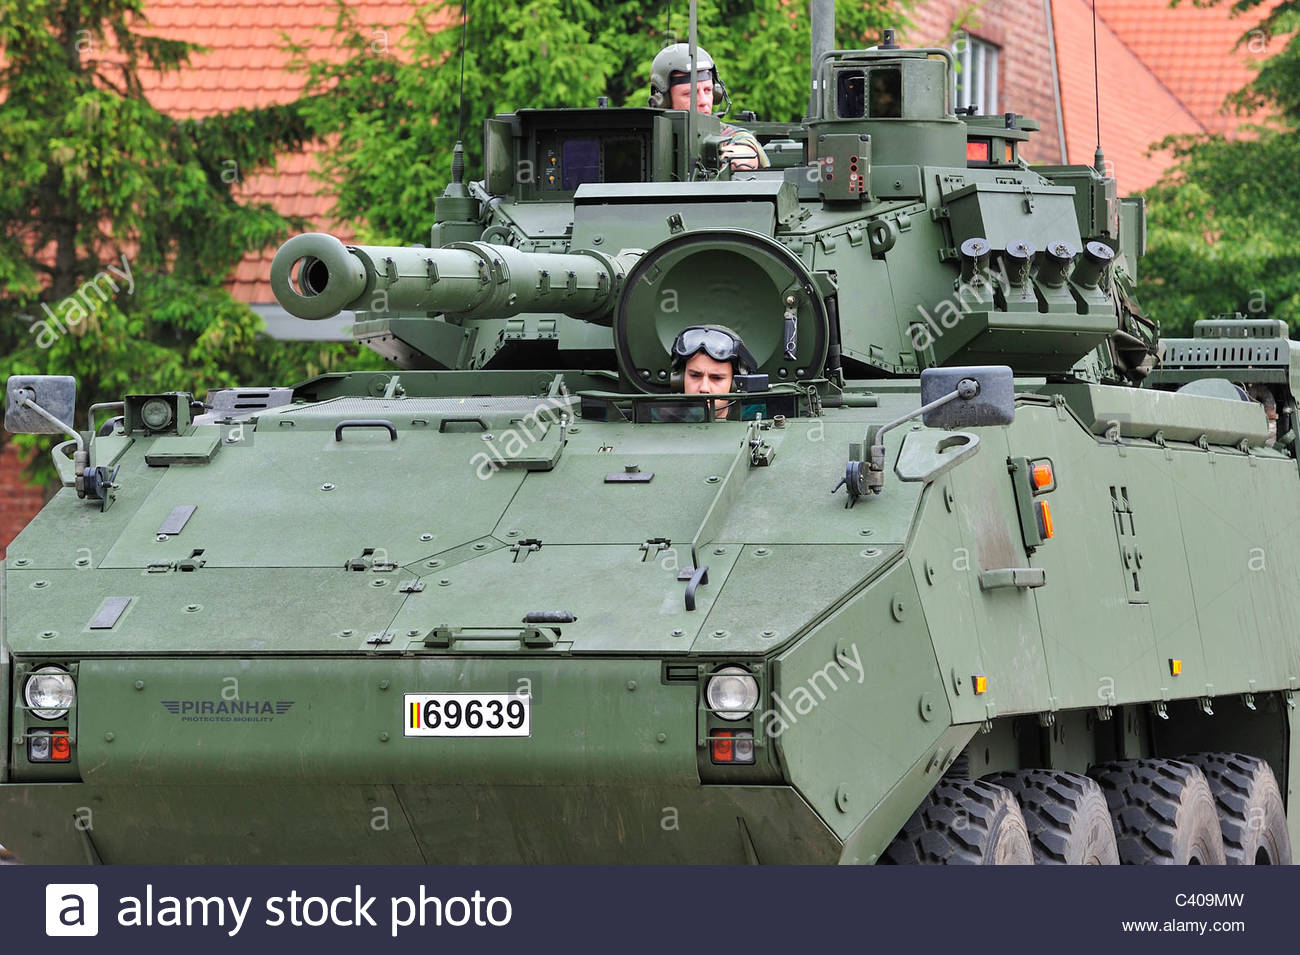 driver-and-commander-in-turret-of-mowag-piranha-iiic-armoured-fighting-C409MW.jpg